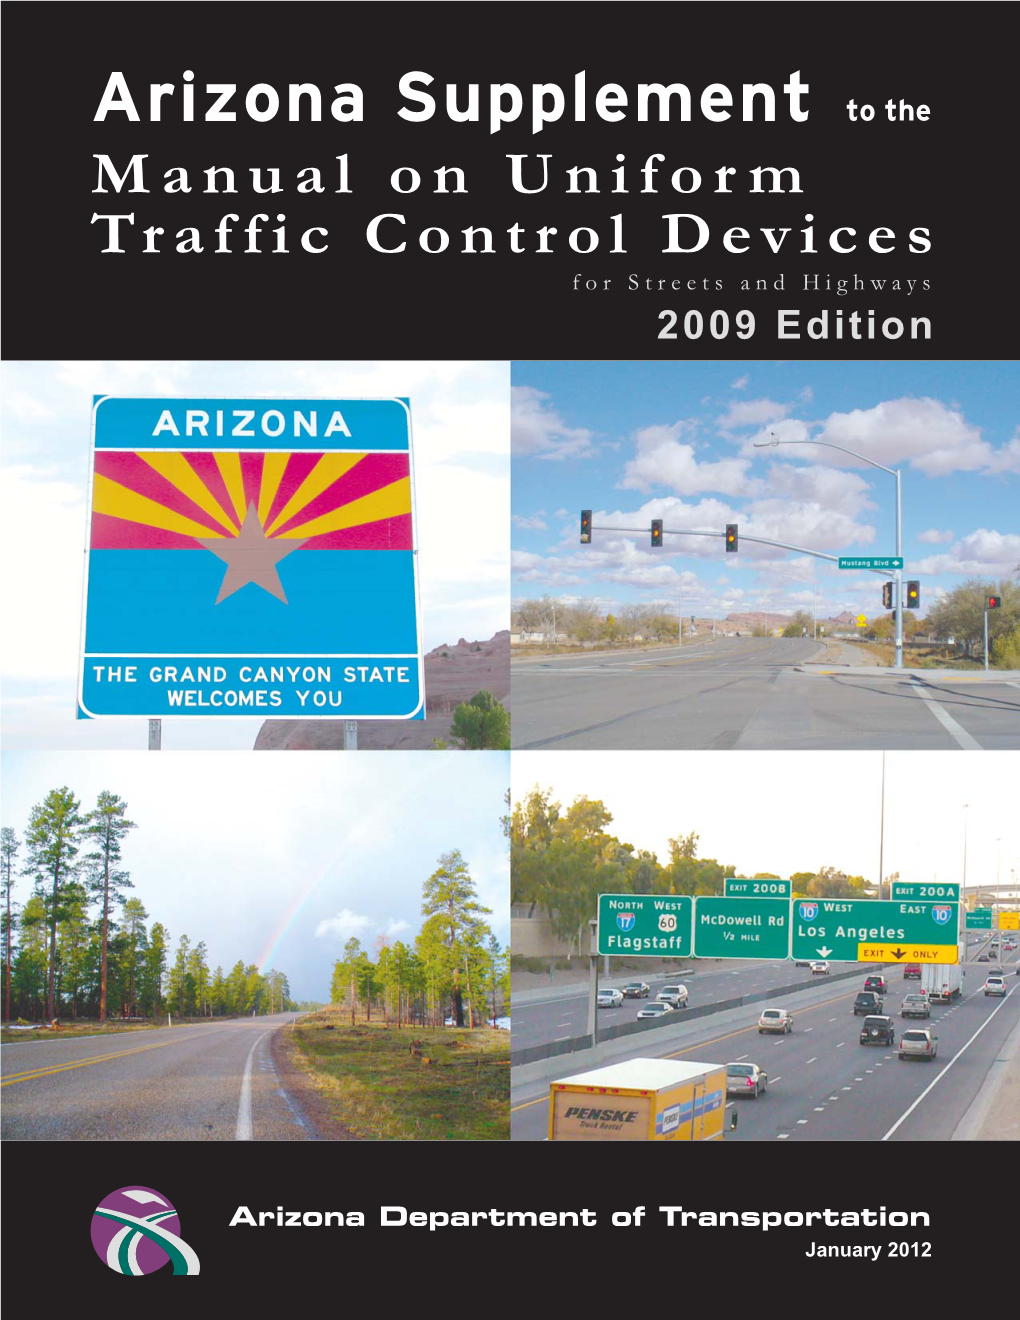 Arizona Supplement to the Manual on Uniform Traffic Control Devices for Streets and Highways 2009 Edition